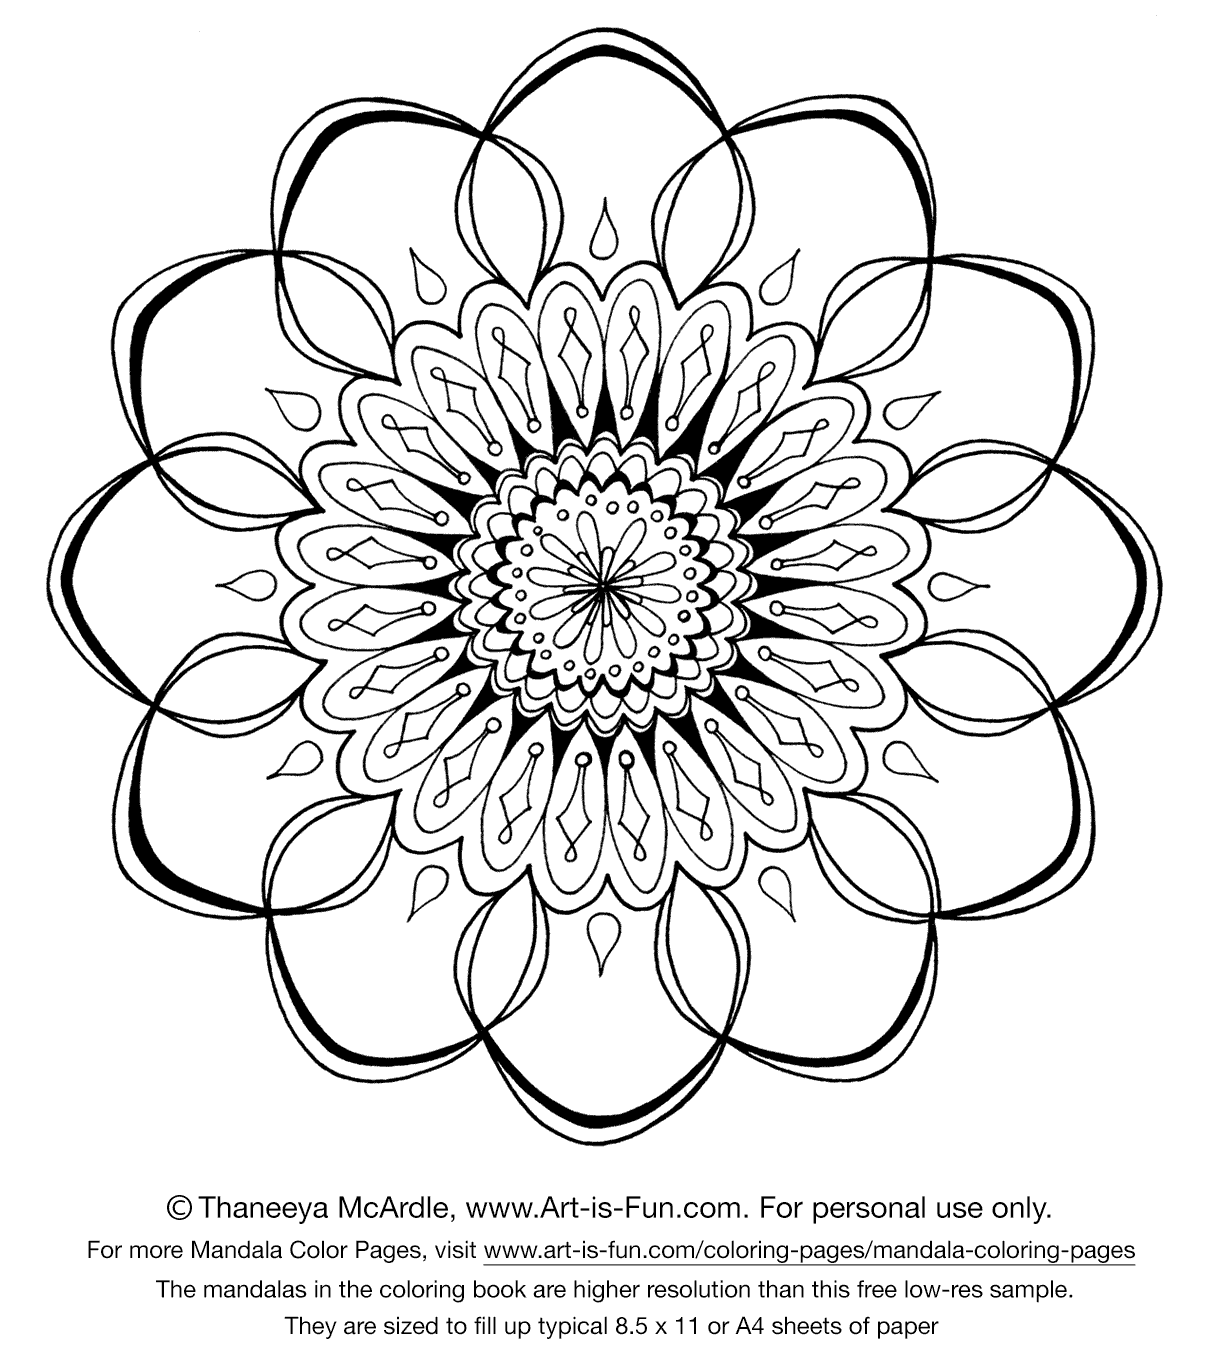 free design art coloring pages 25 coloring pages including mandalas geometric designs rug art free design coloring pages 